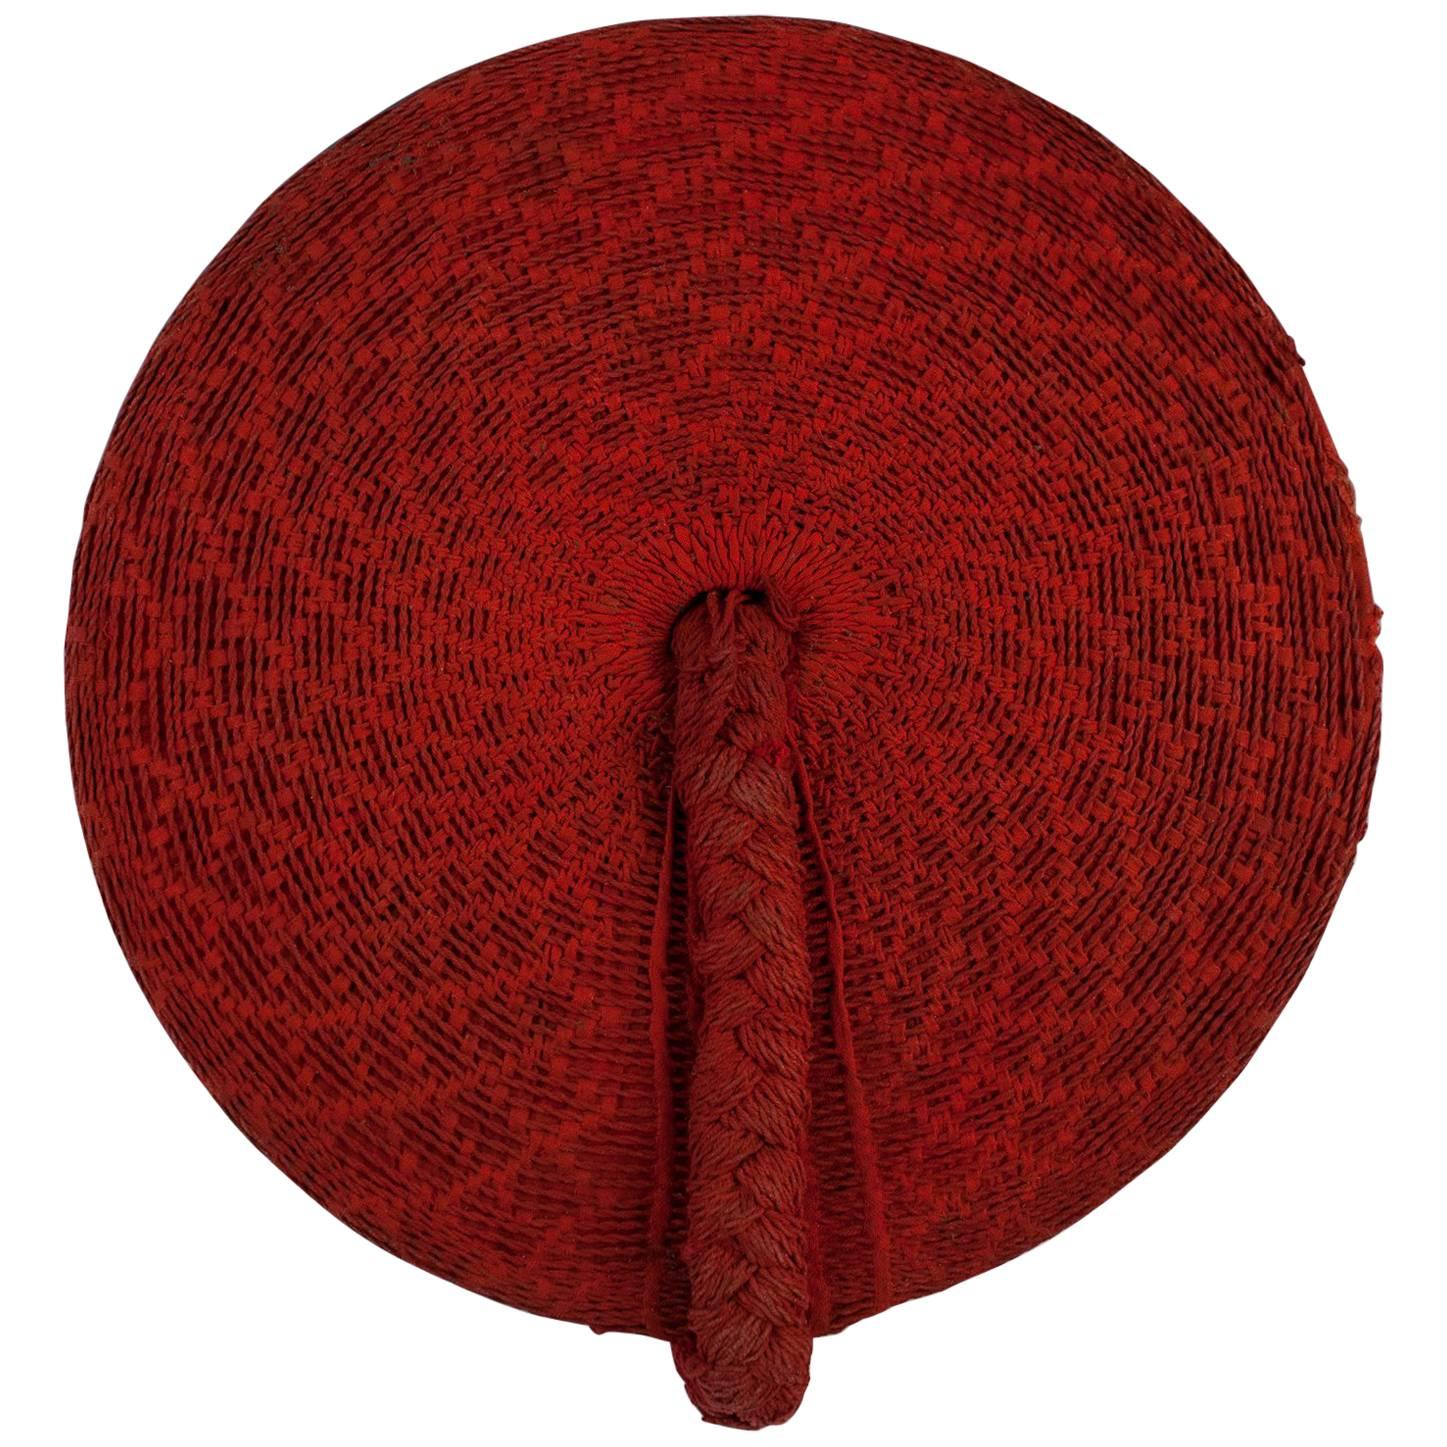 Tribal Mid-20th Century Zulu Women's Red Cotton Hat, Isicholo, South Africa